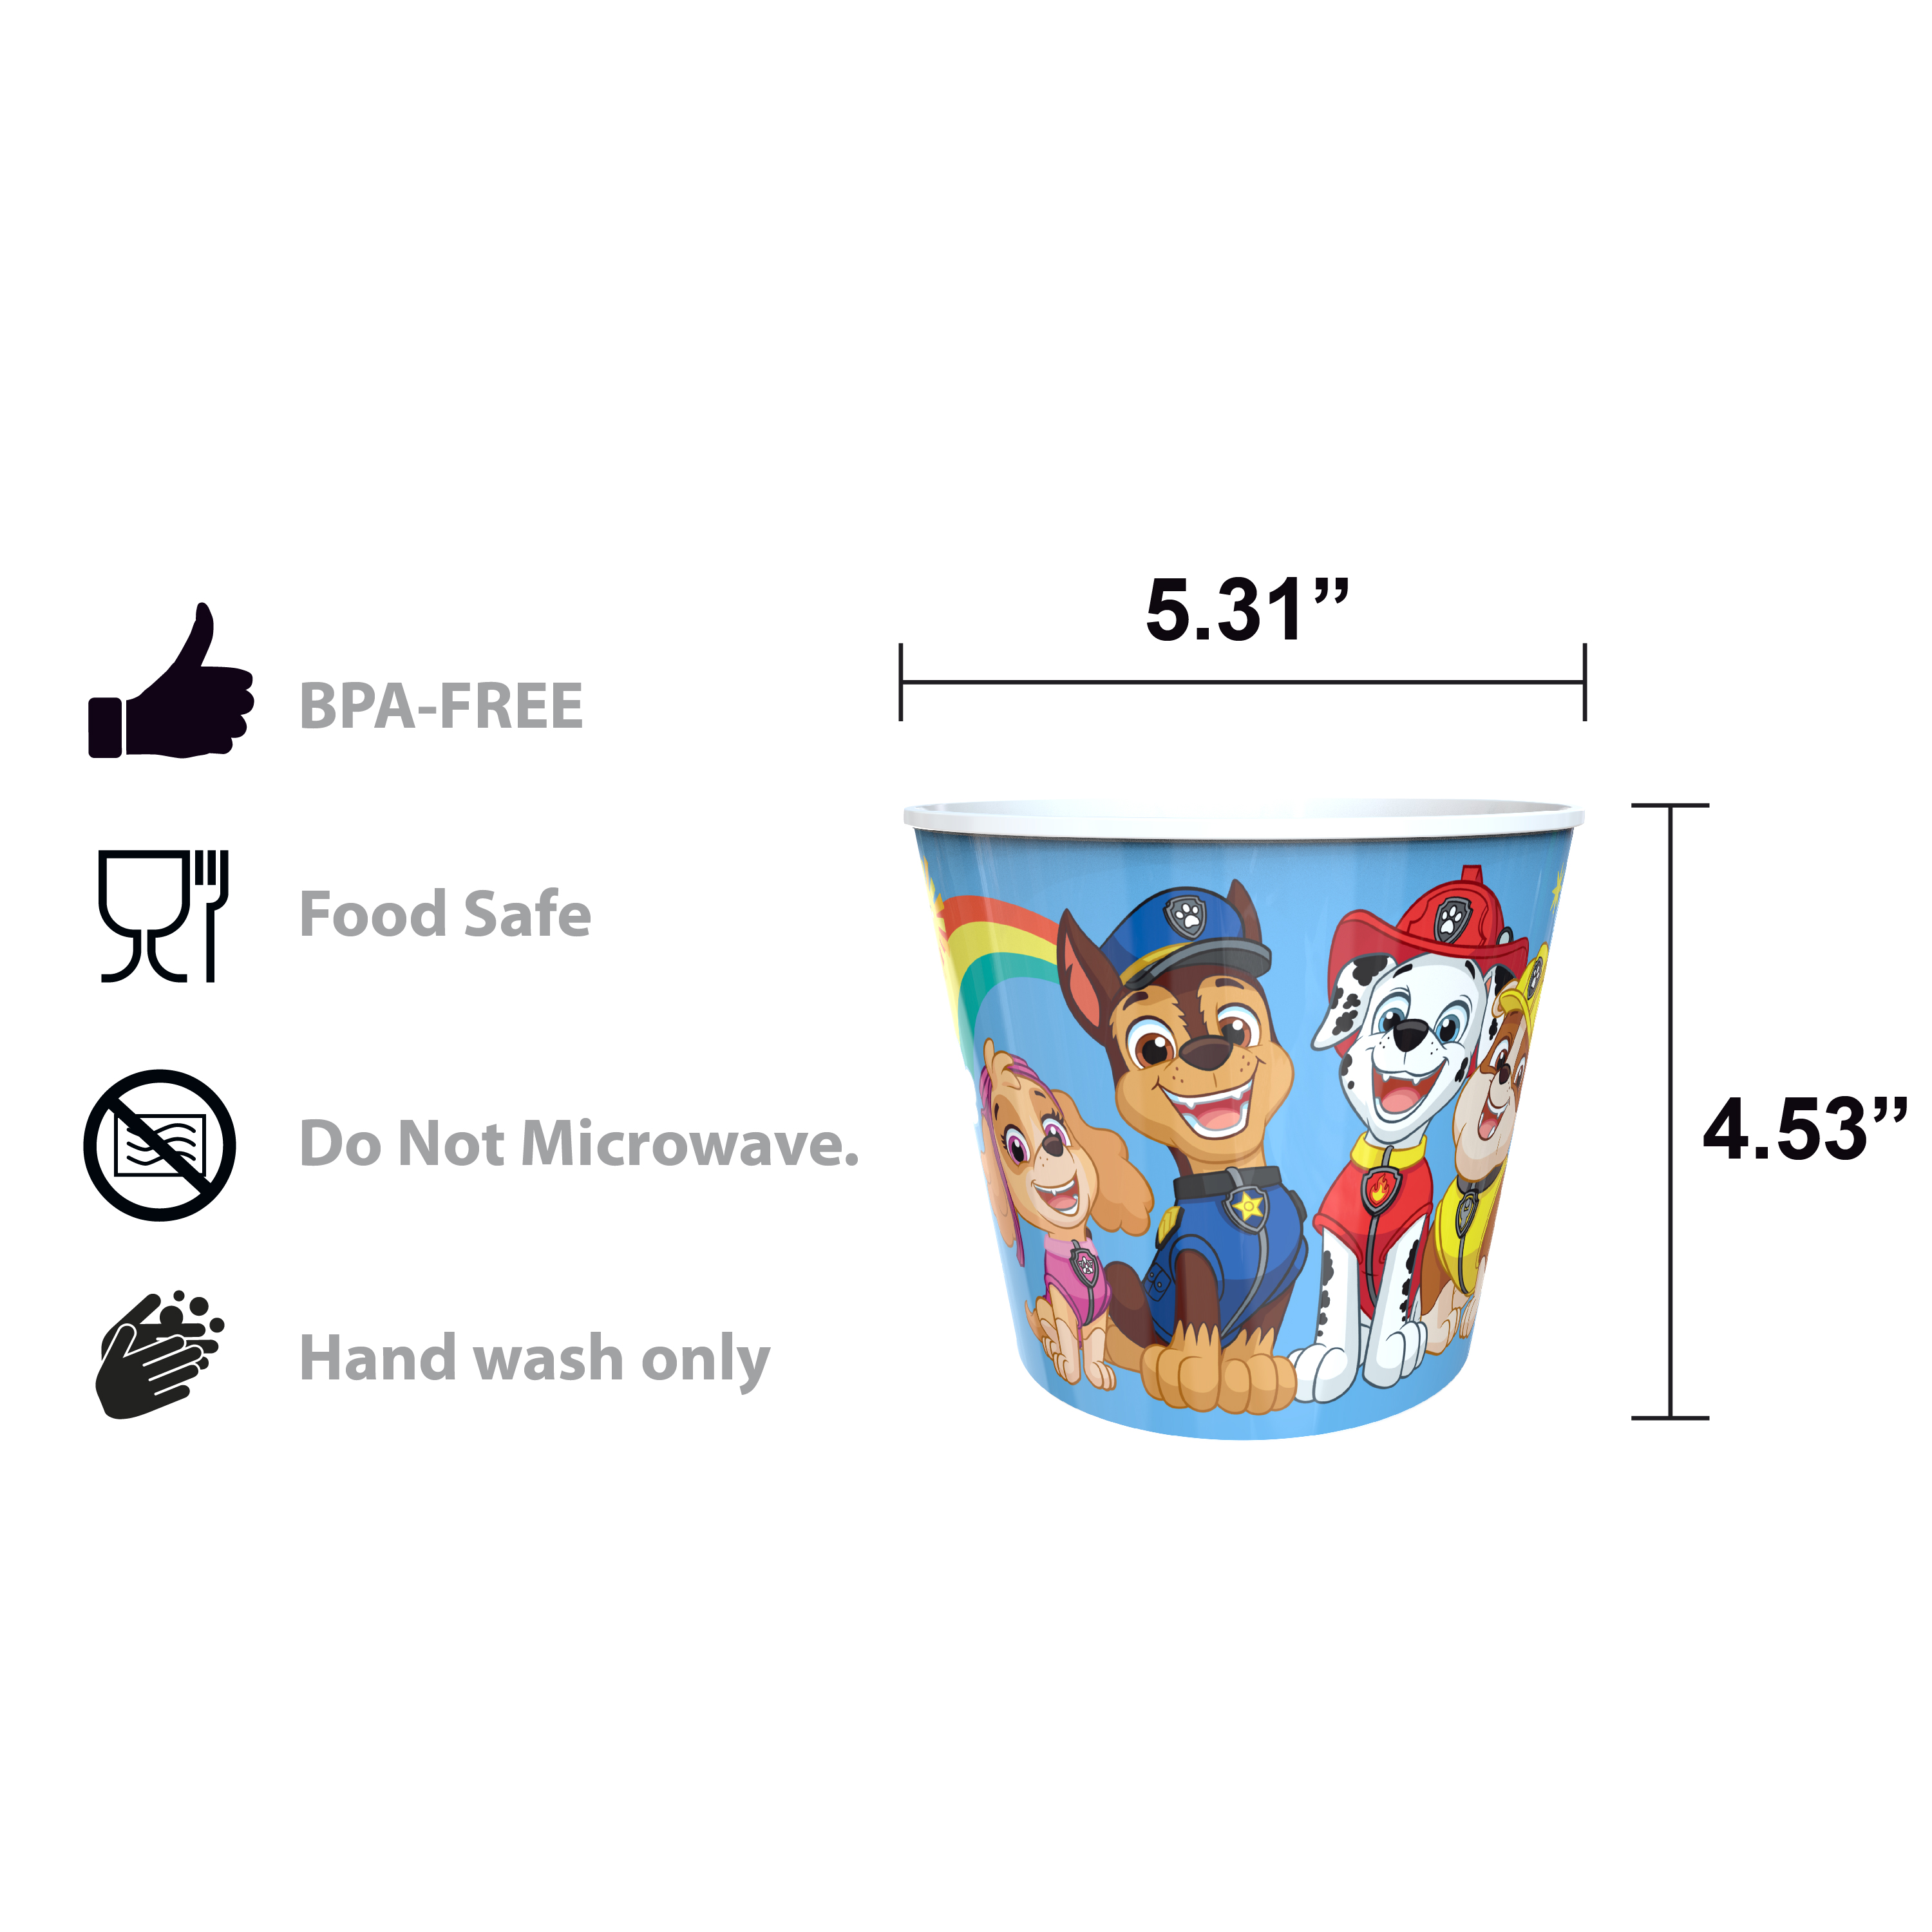 Paw Patrol Plastic Popcorn Container and Bowls, Chase, Marshall and Friends, 5-piece set slideshow image 12